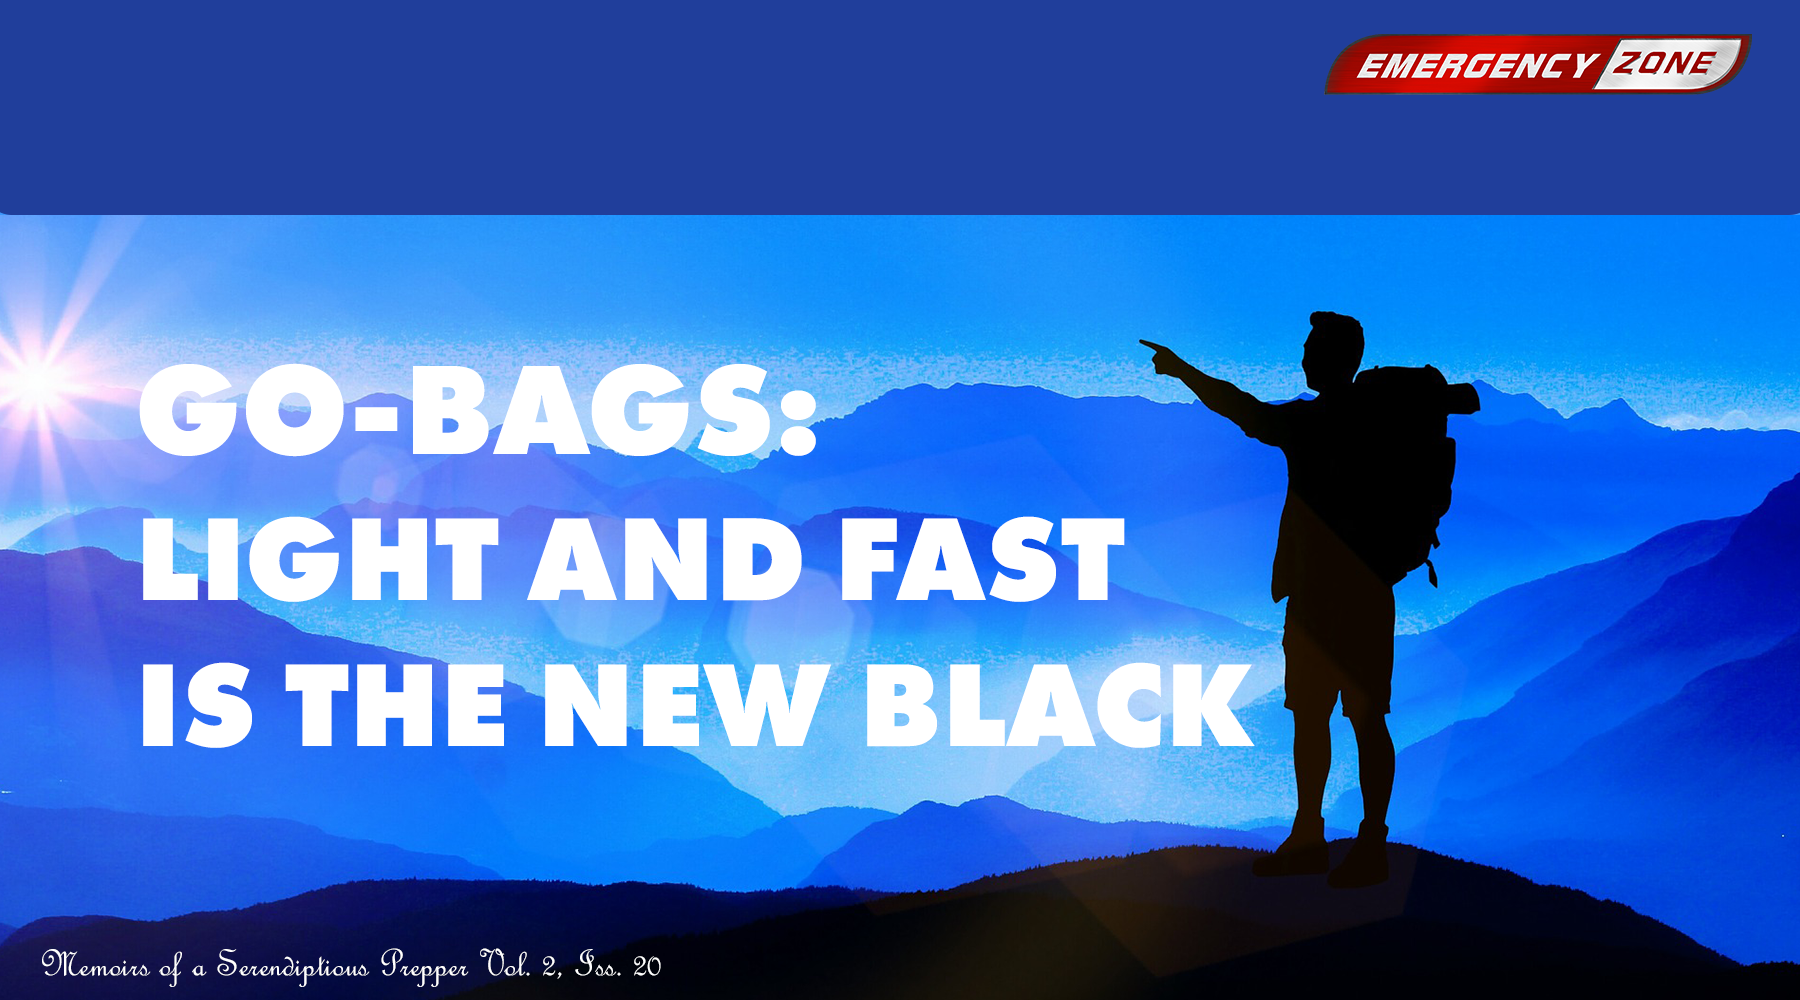 Go-Bags:  Light and Fast is the New Black